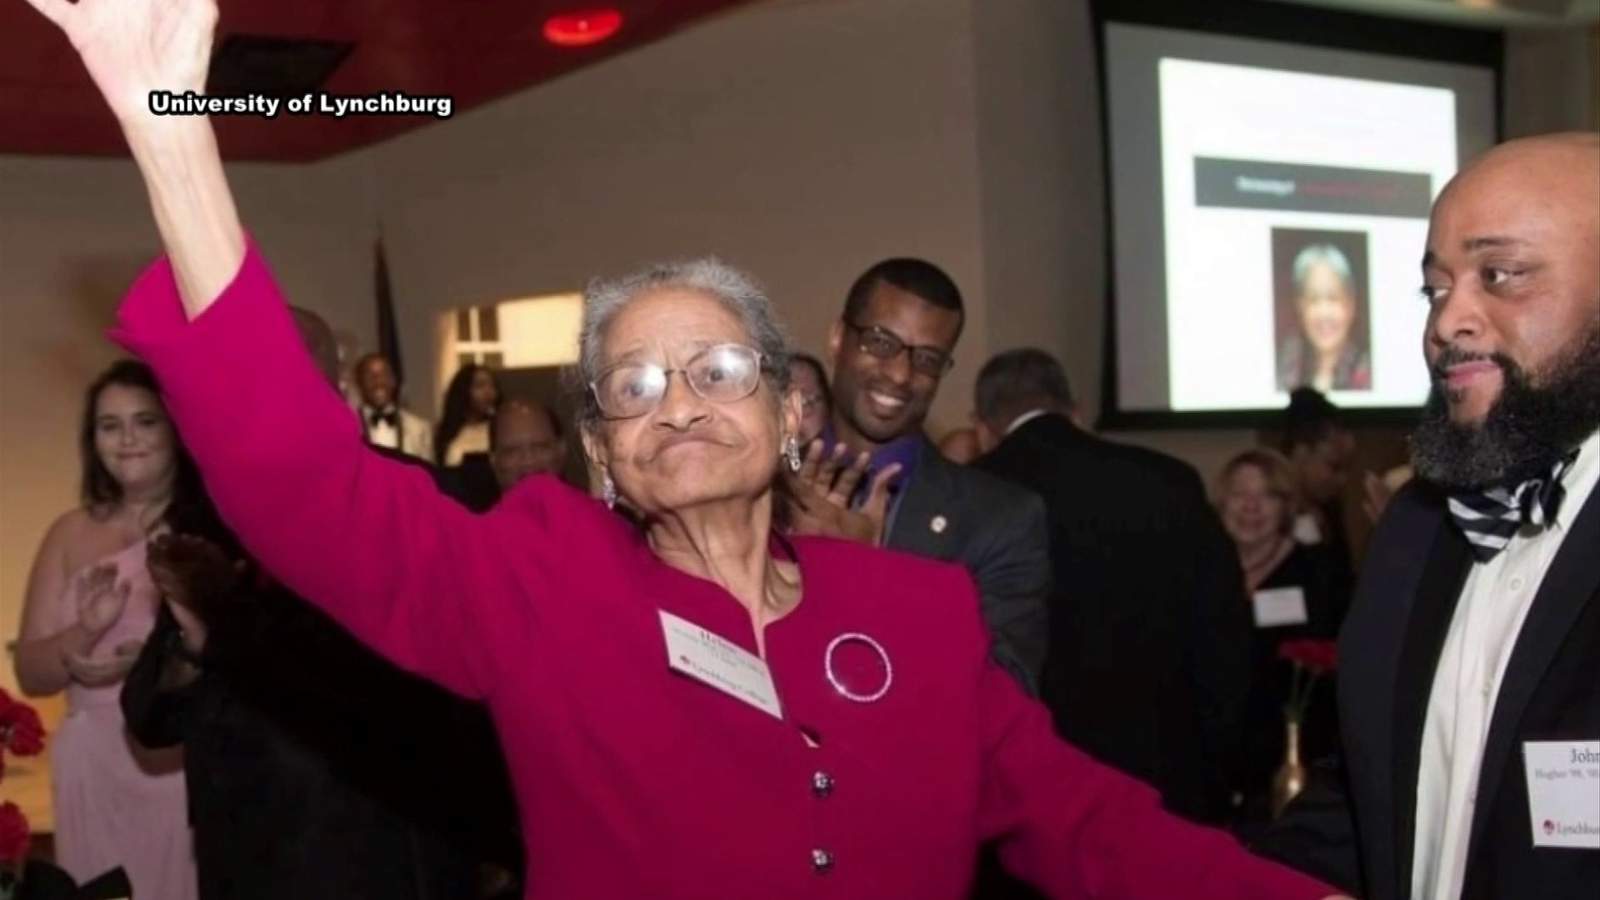 ‘Legacy of perseverance’: University of Lynchburg’s first Black graduate dies at 88